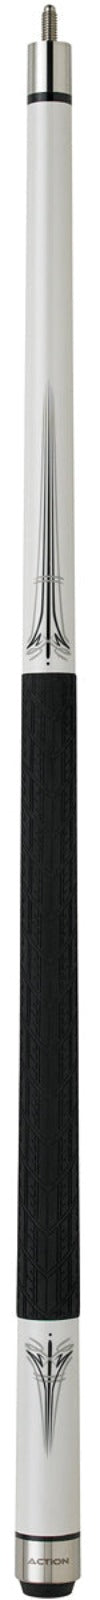 Action Action KRM01 Pool Cue Pool Cue